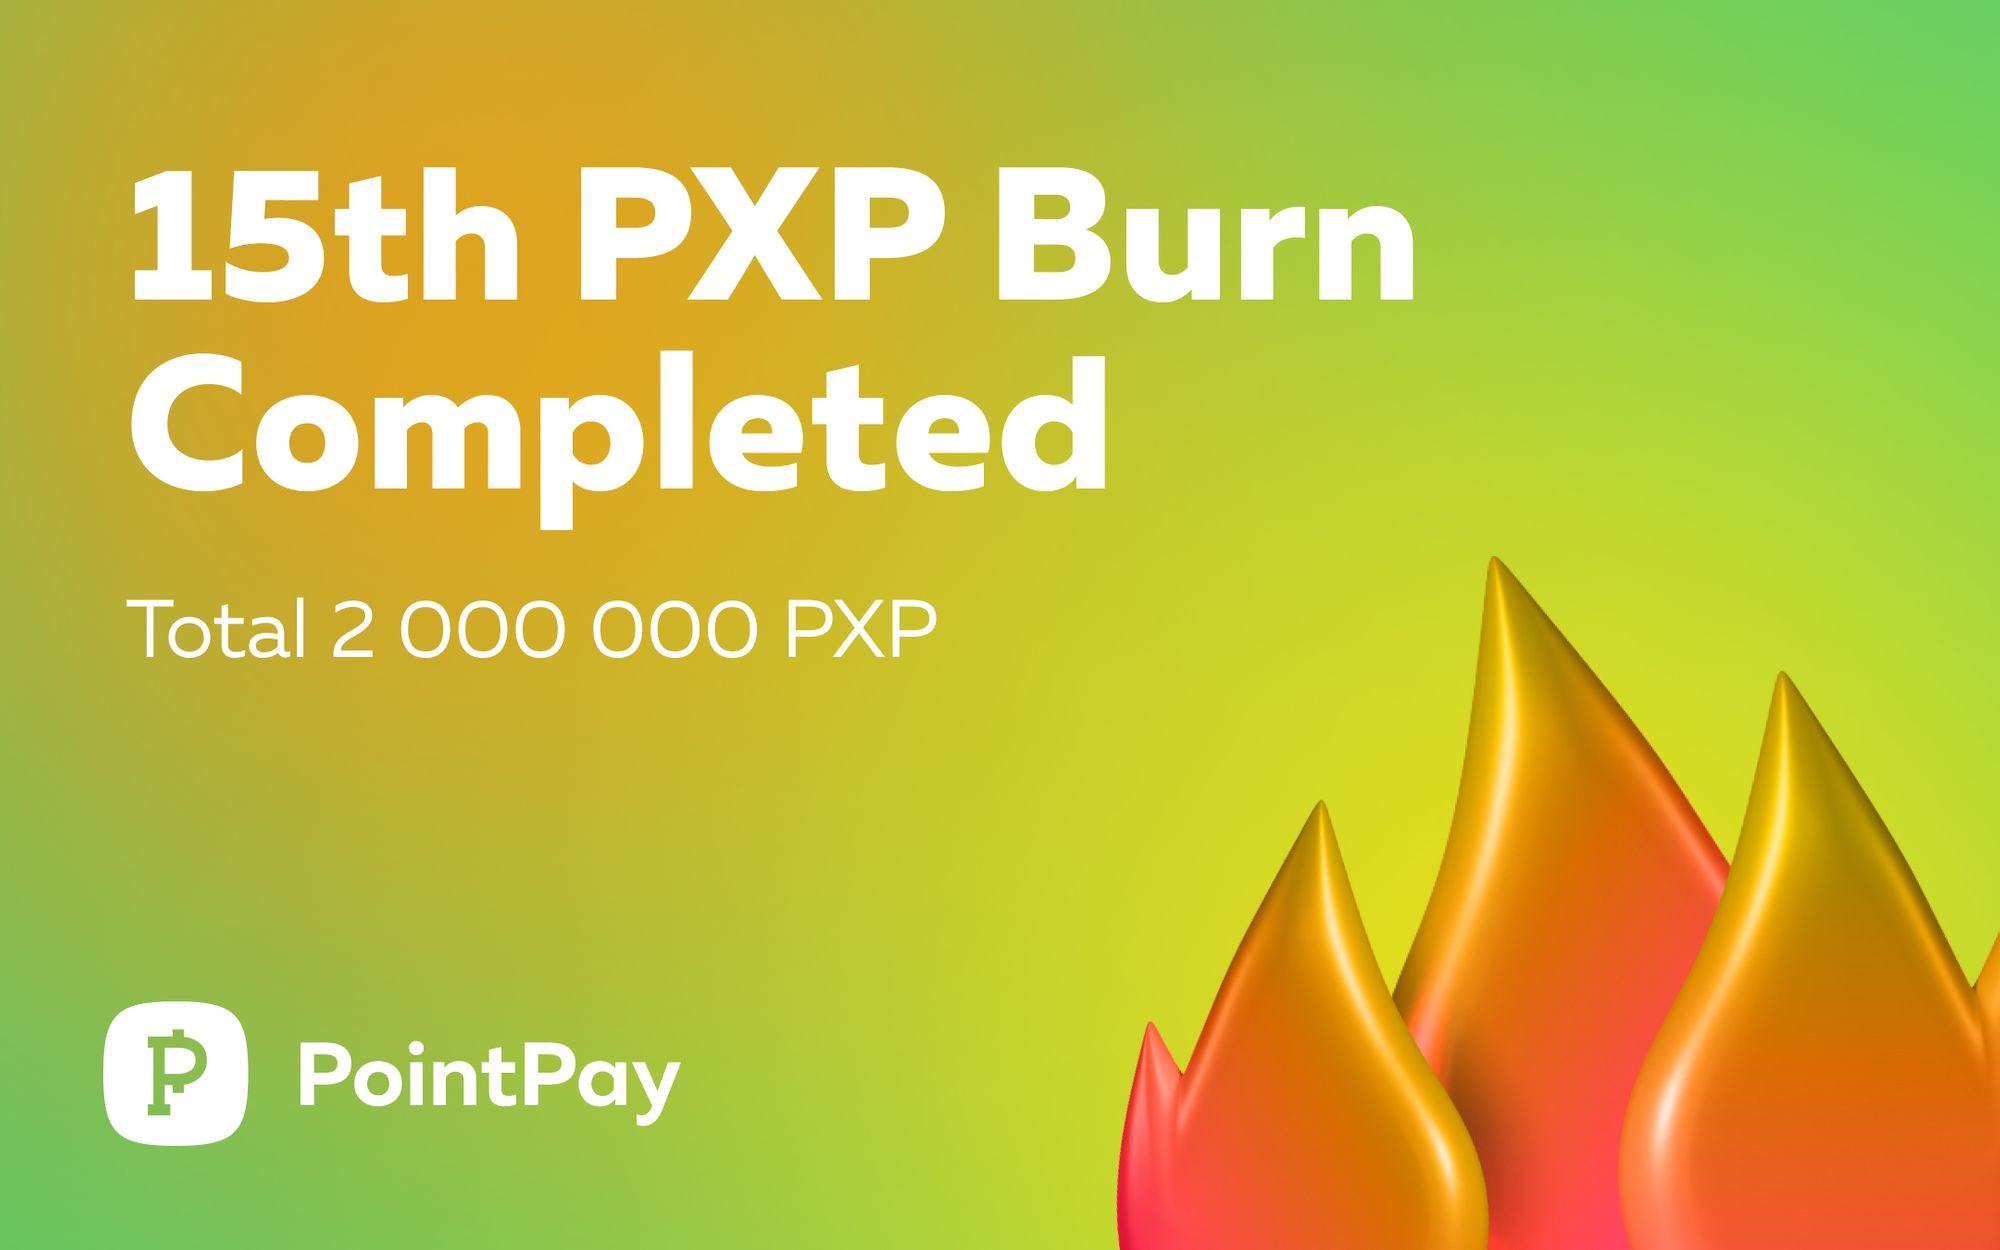 15th PXP Burn Completed